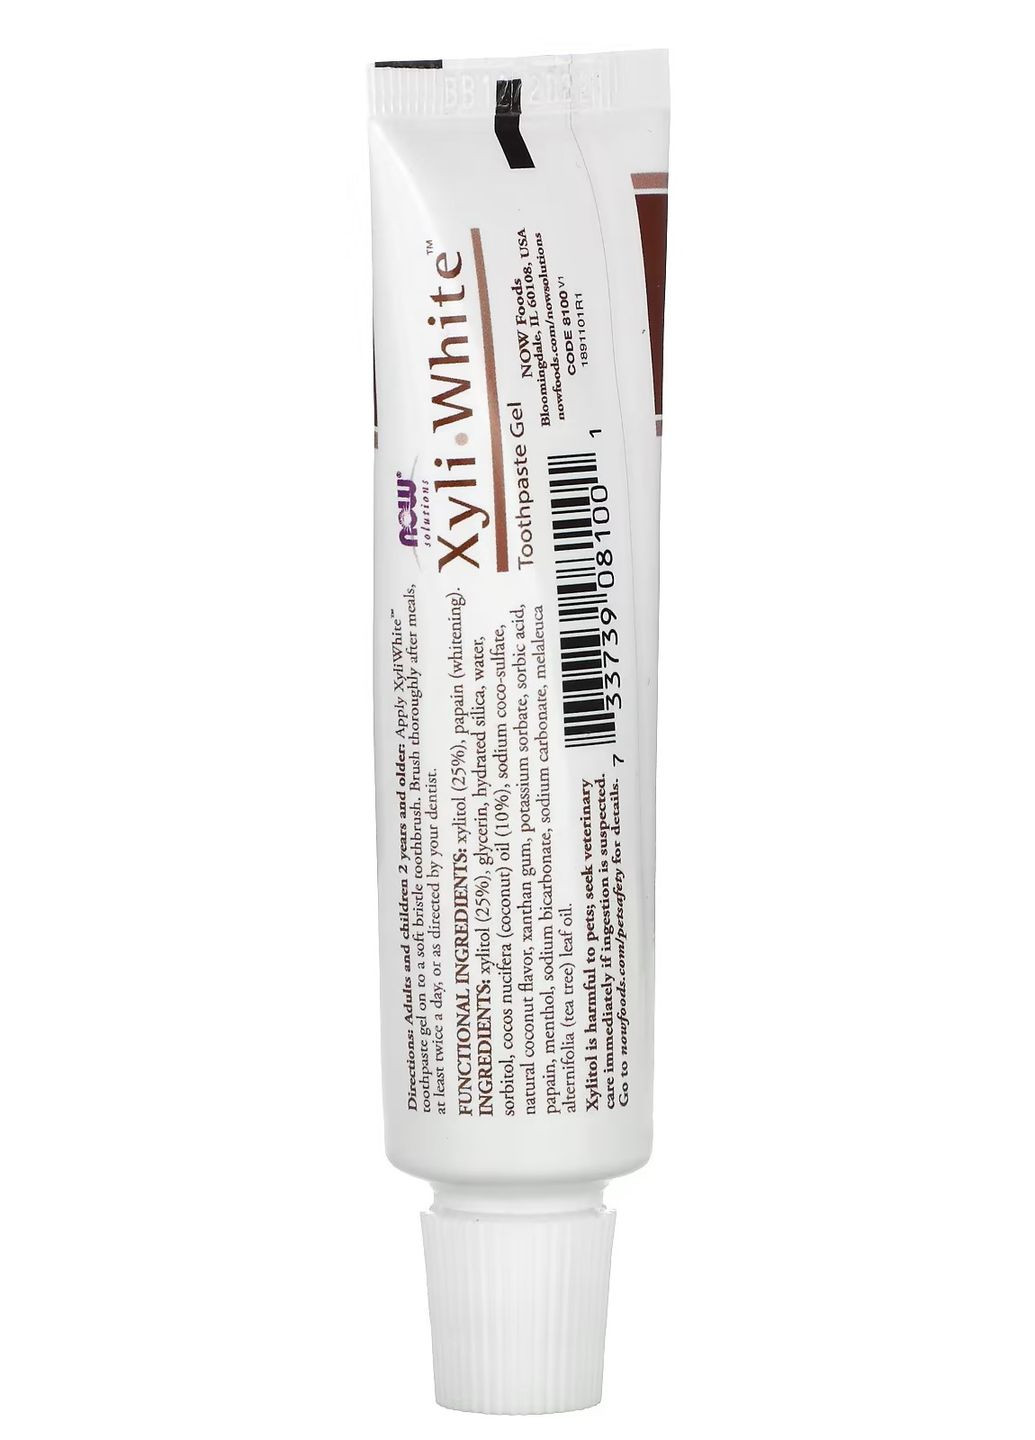 Зубная паста XyliWhite, Toothpaste Gel, Coconut Oil, Mint Flavor 28 g Now (277812714)